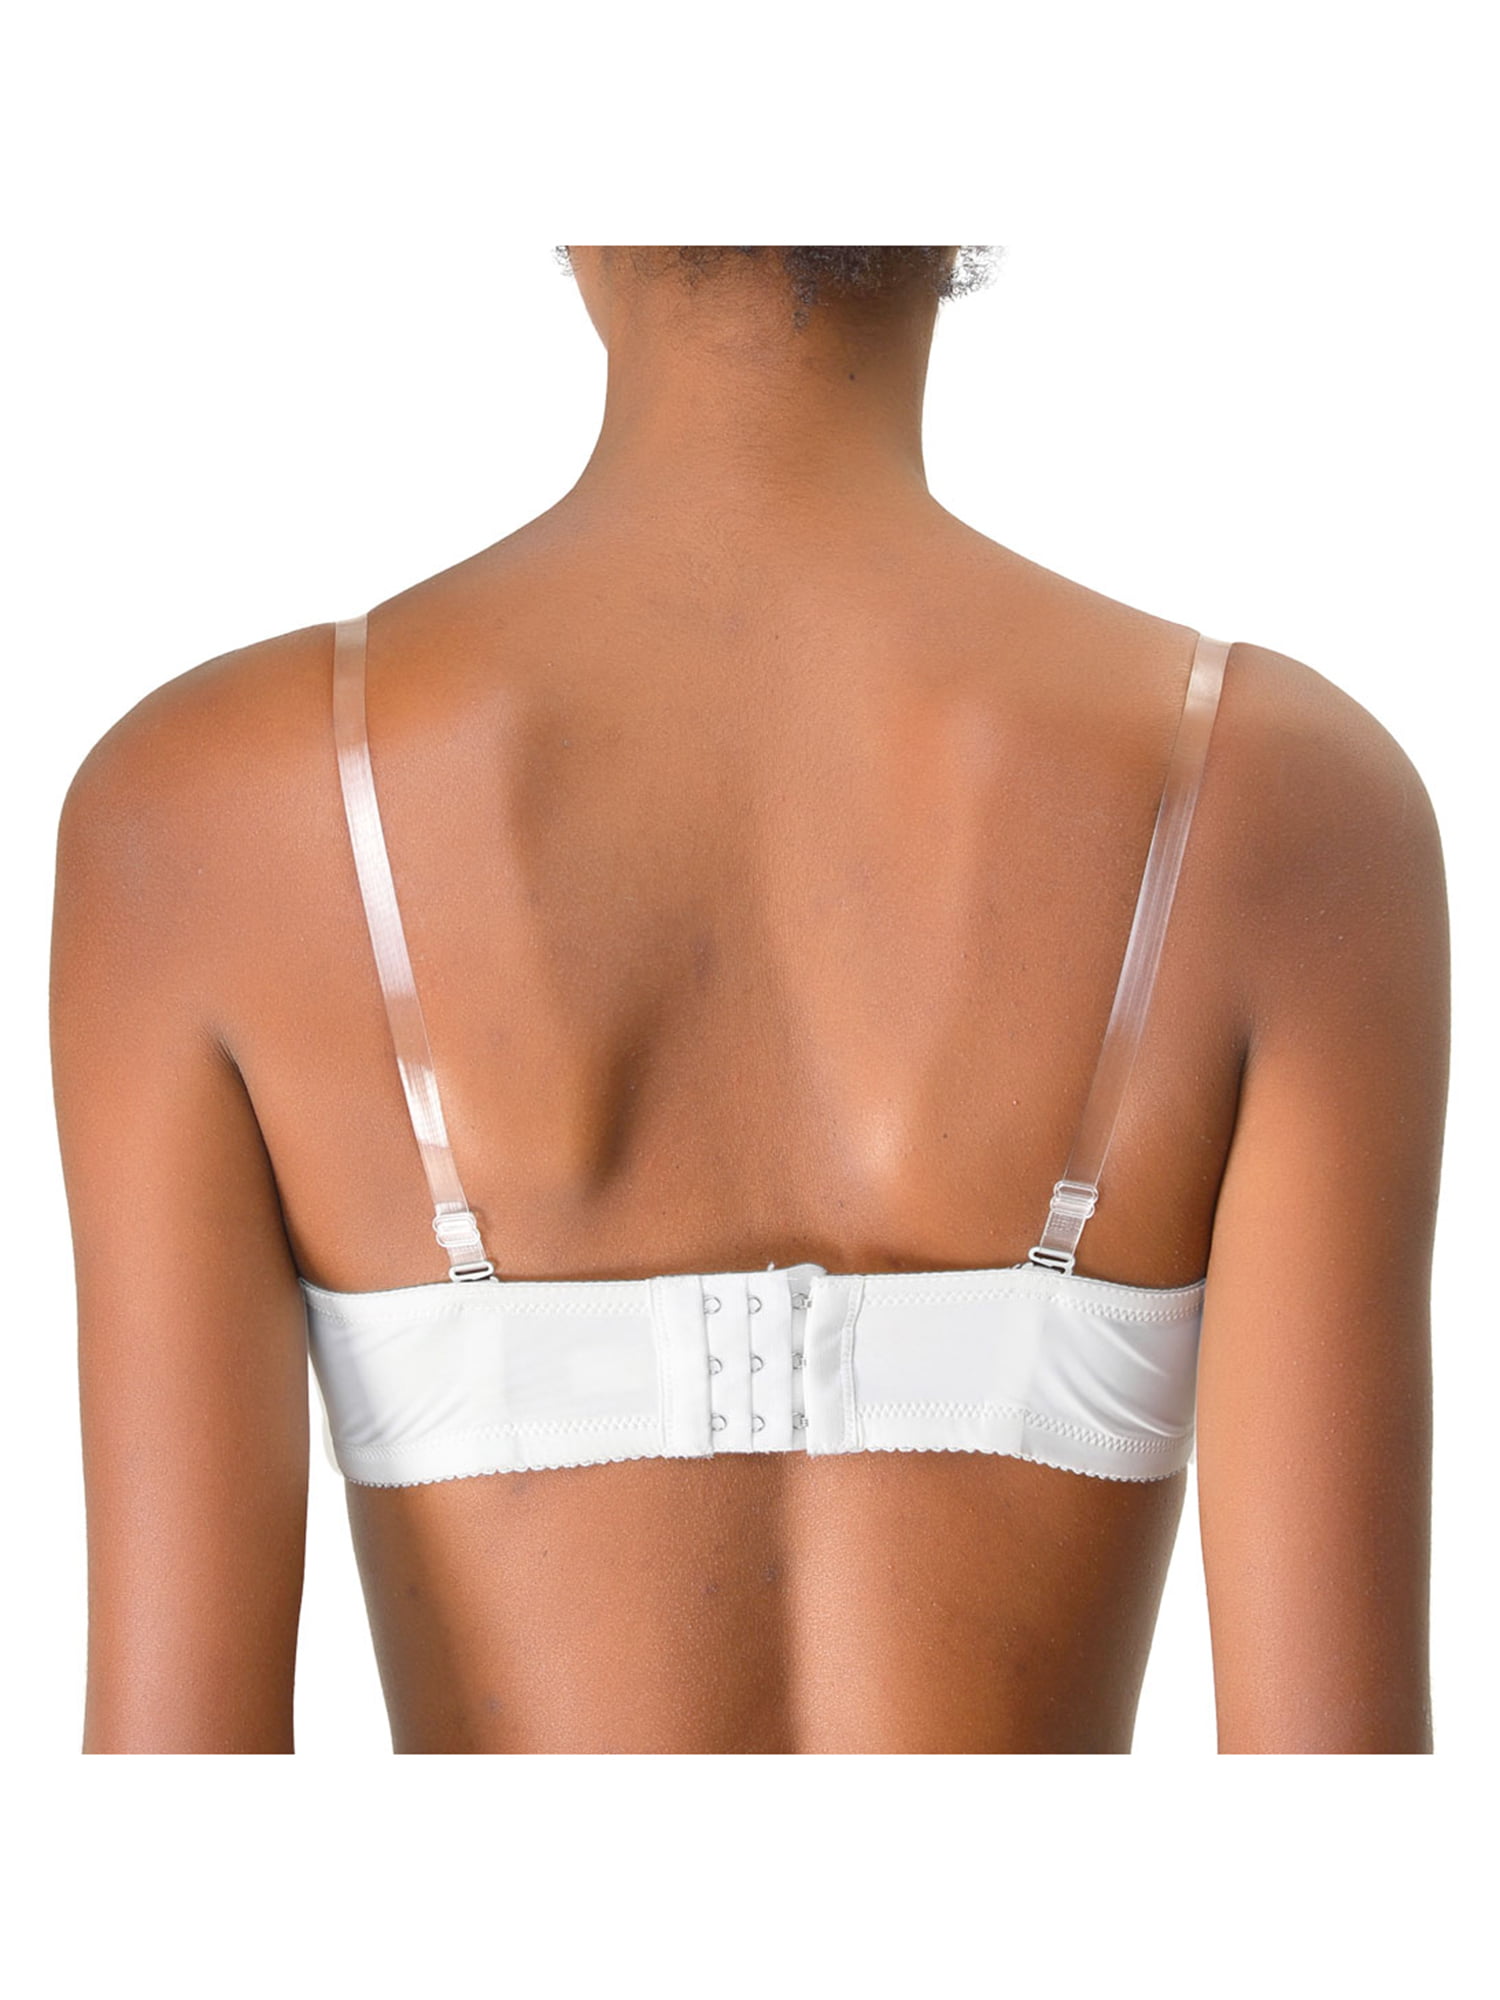 5 Pairs Clear Crystal Invisible Bra Set Shoulder Straps by Fullness